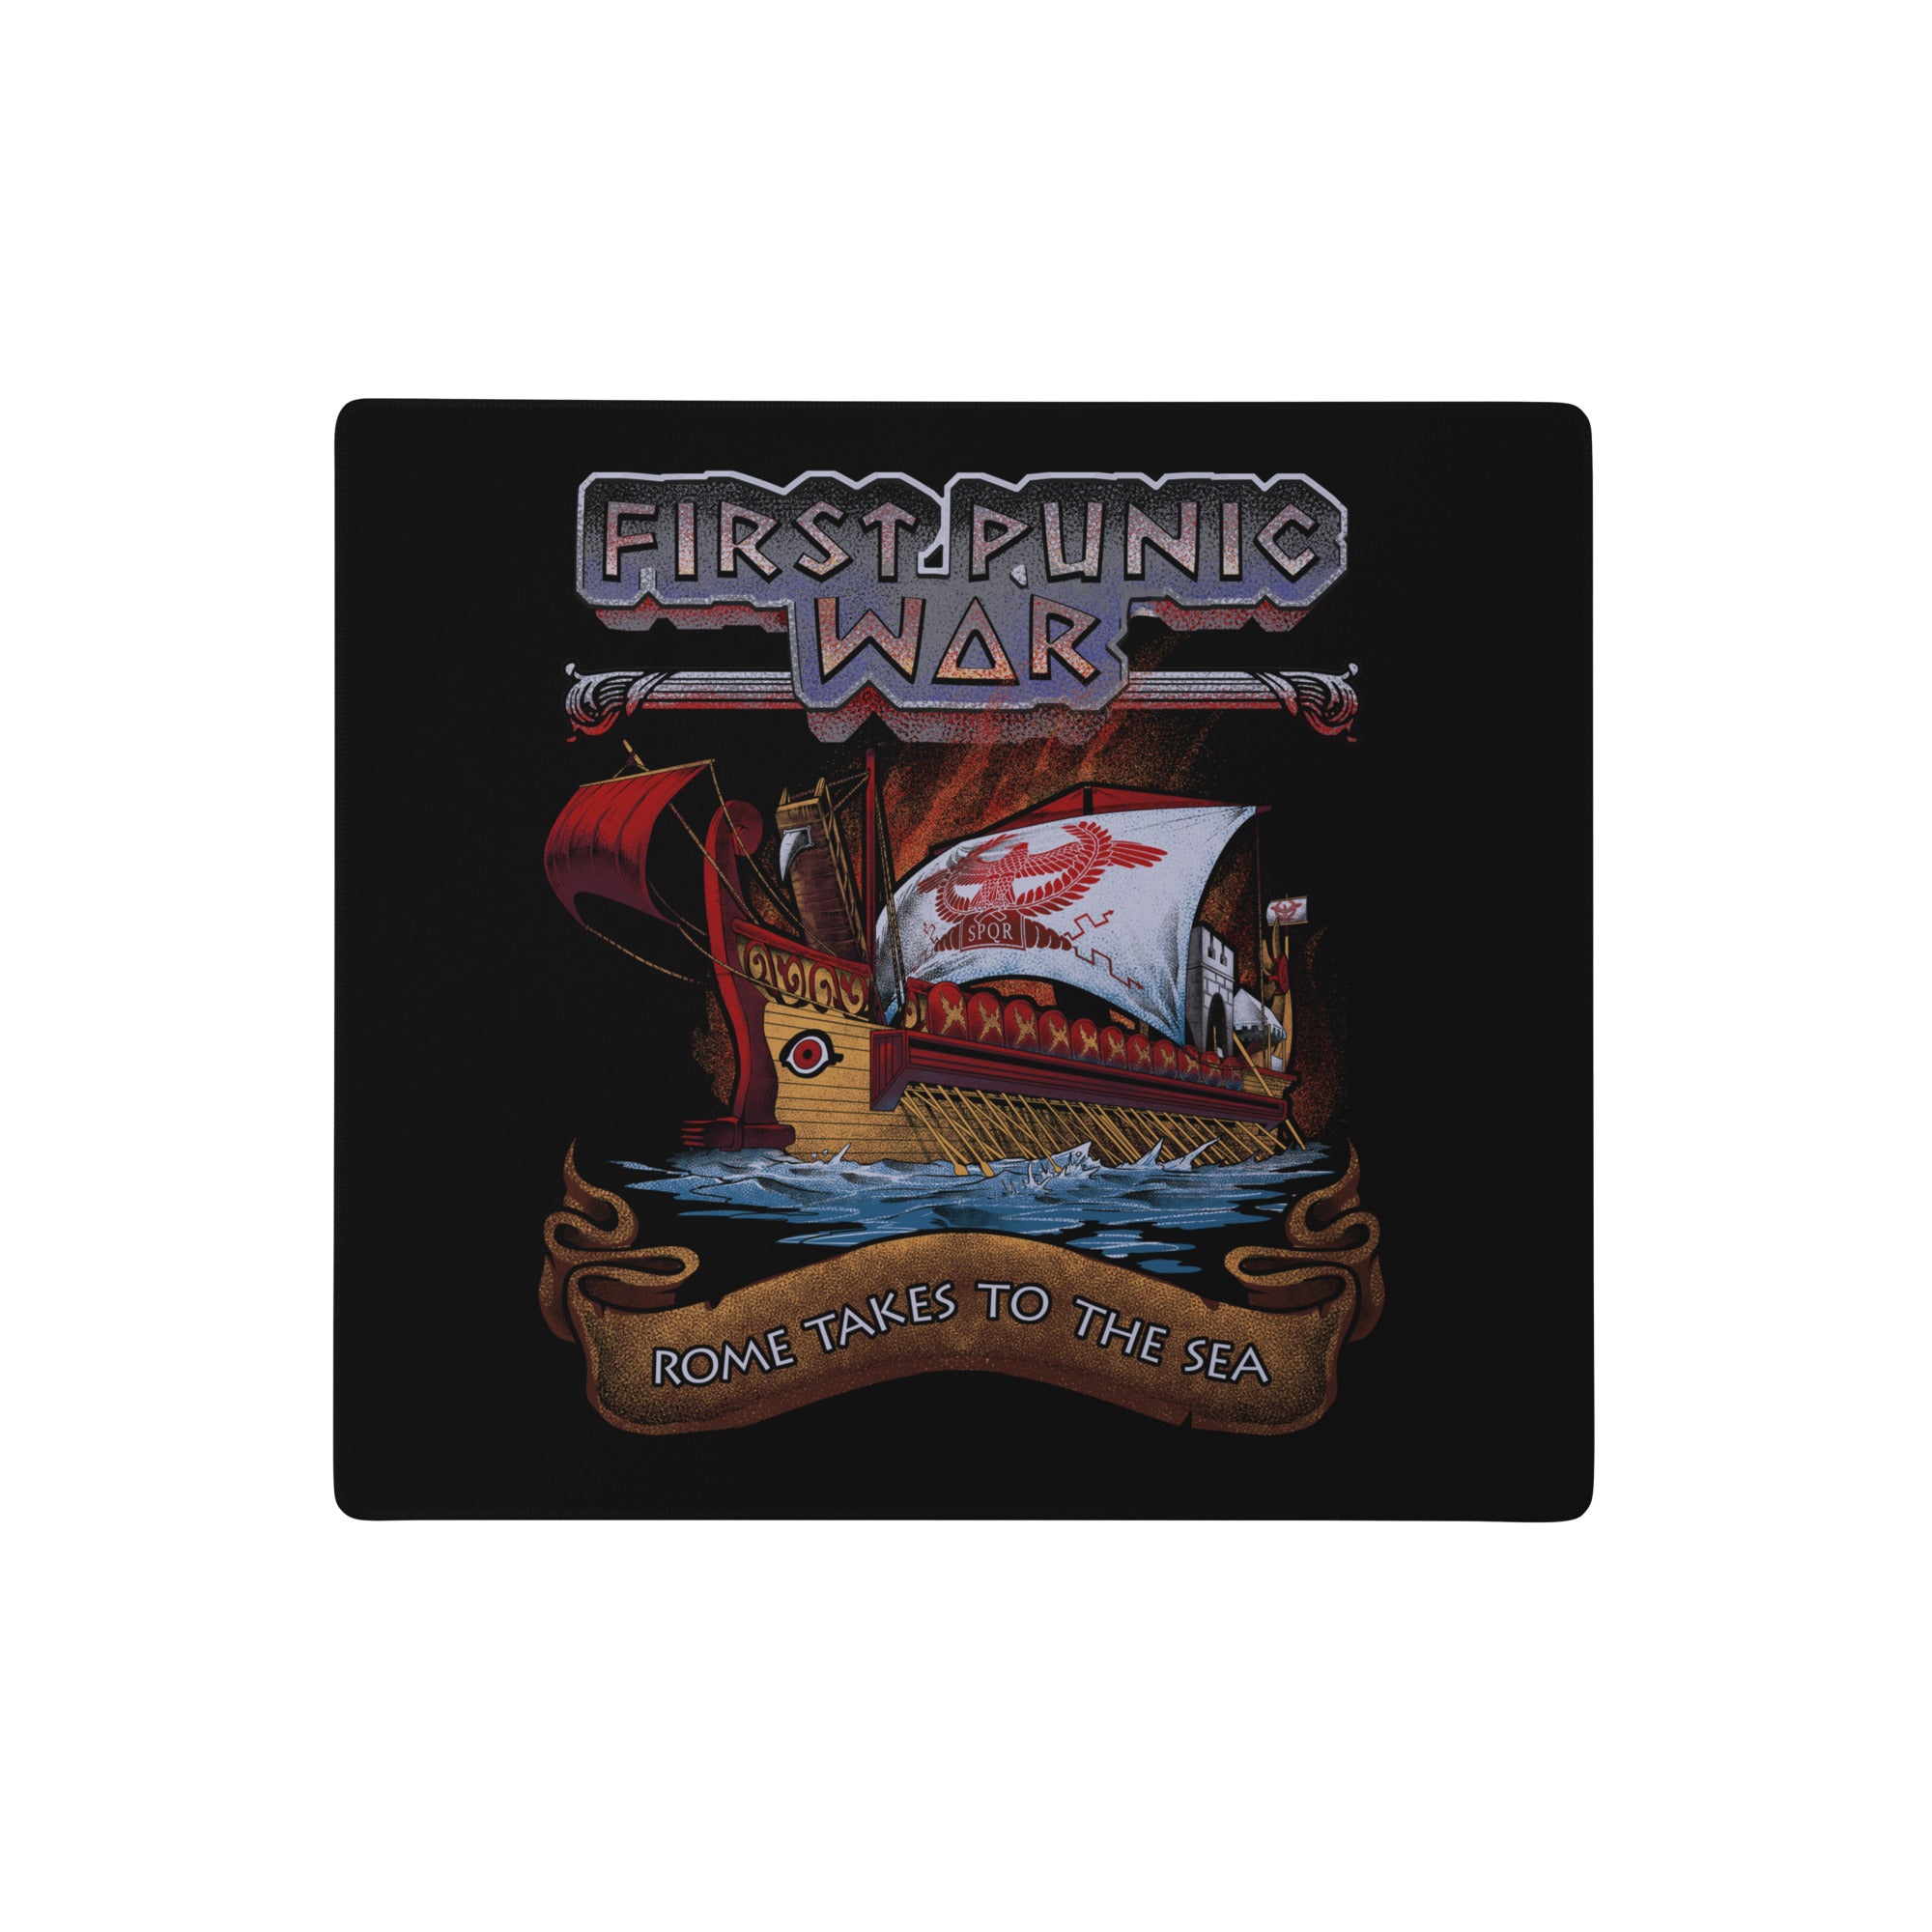 First Punic War - Rome Takes To The Sea - Naval History Gaming Mouse Pad